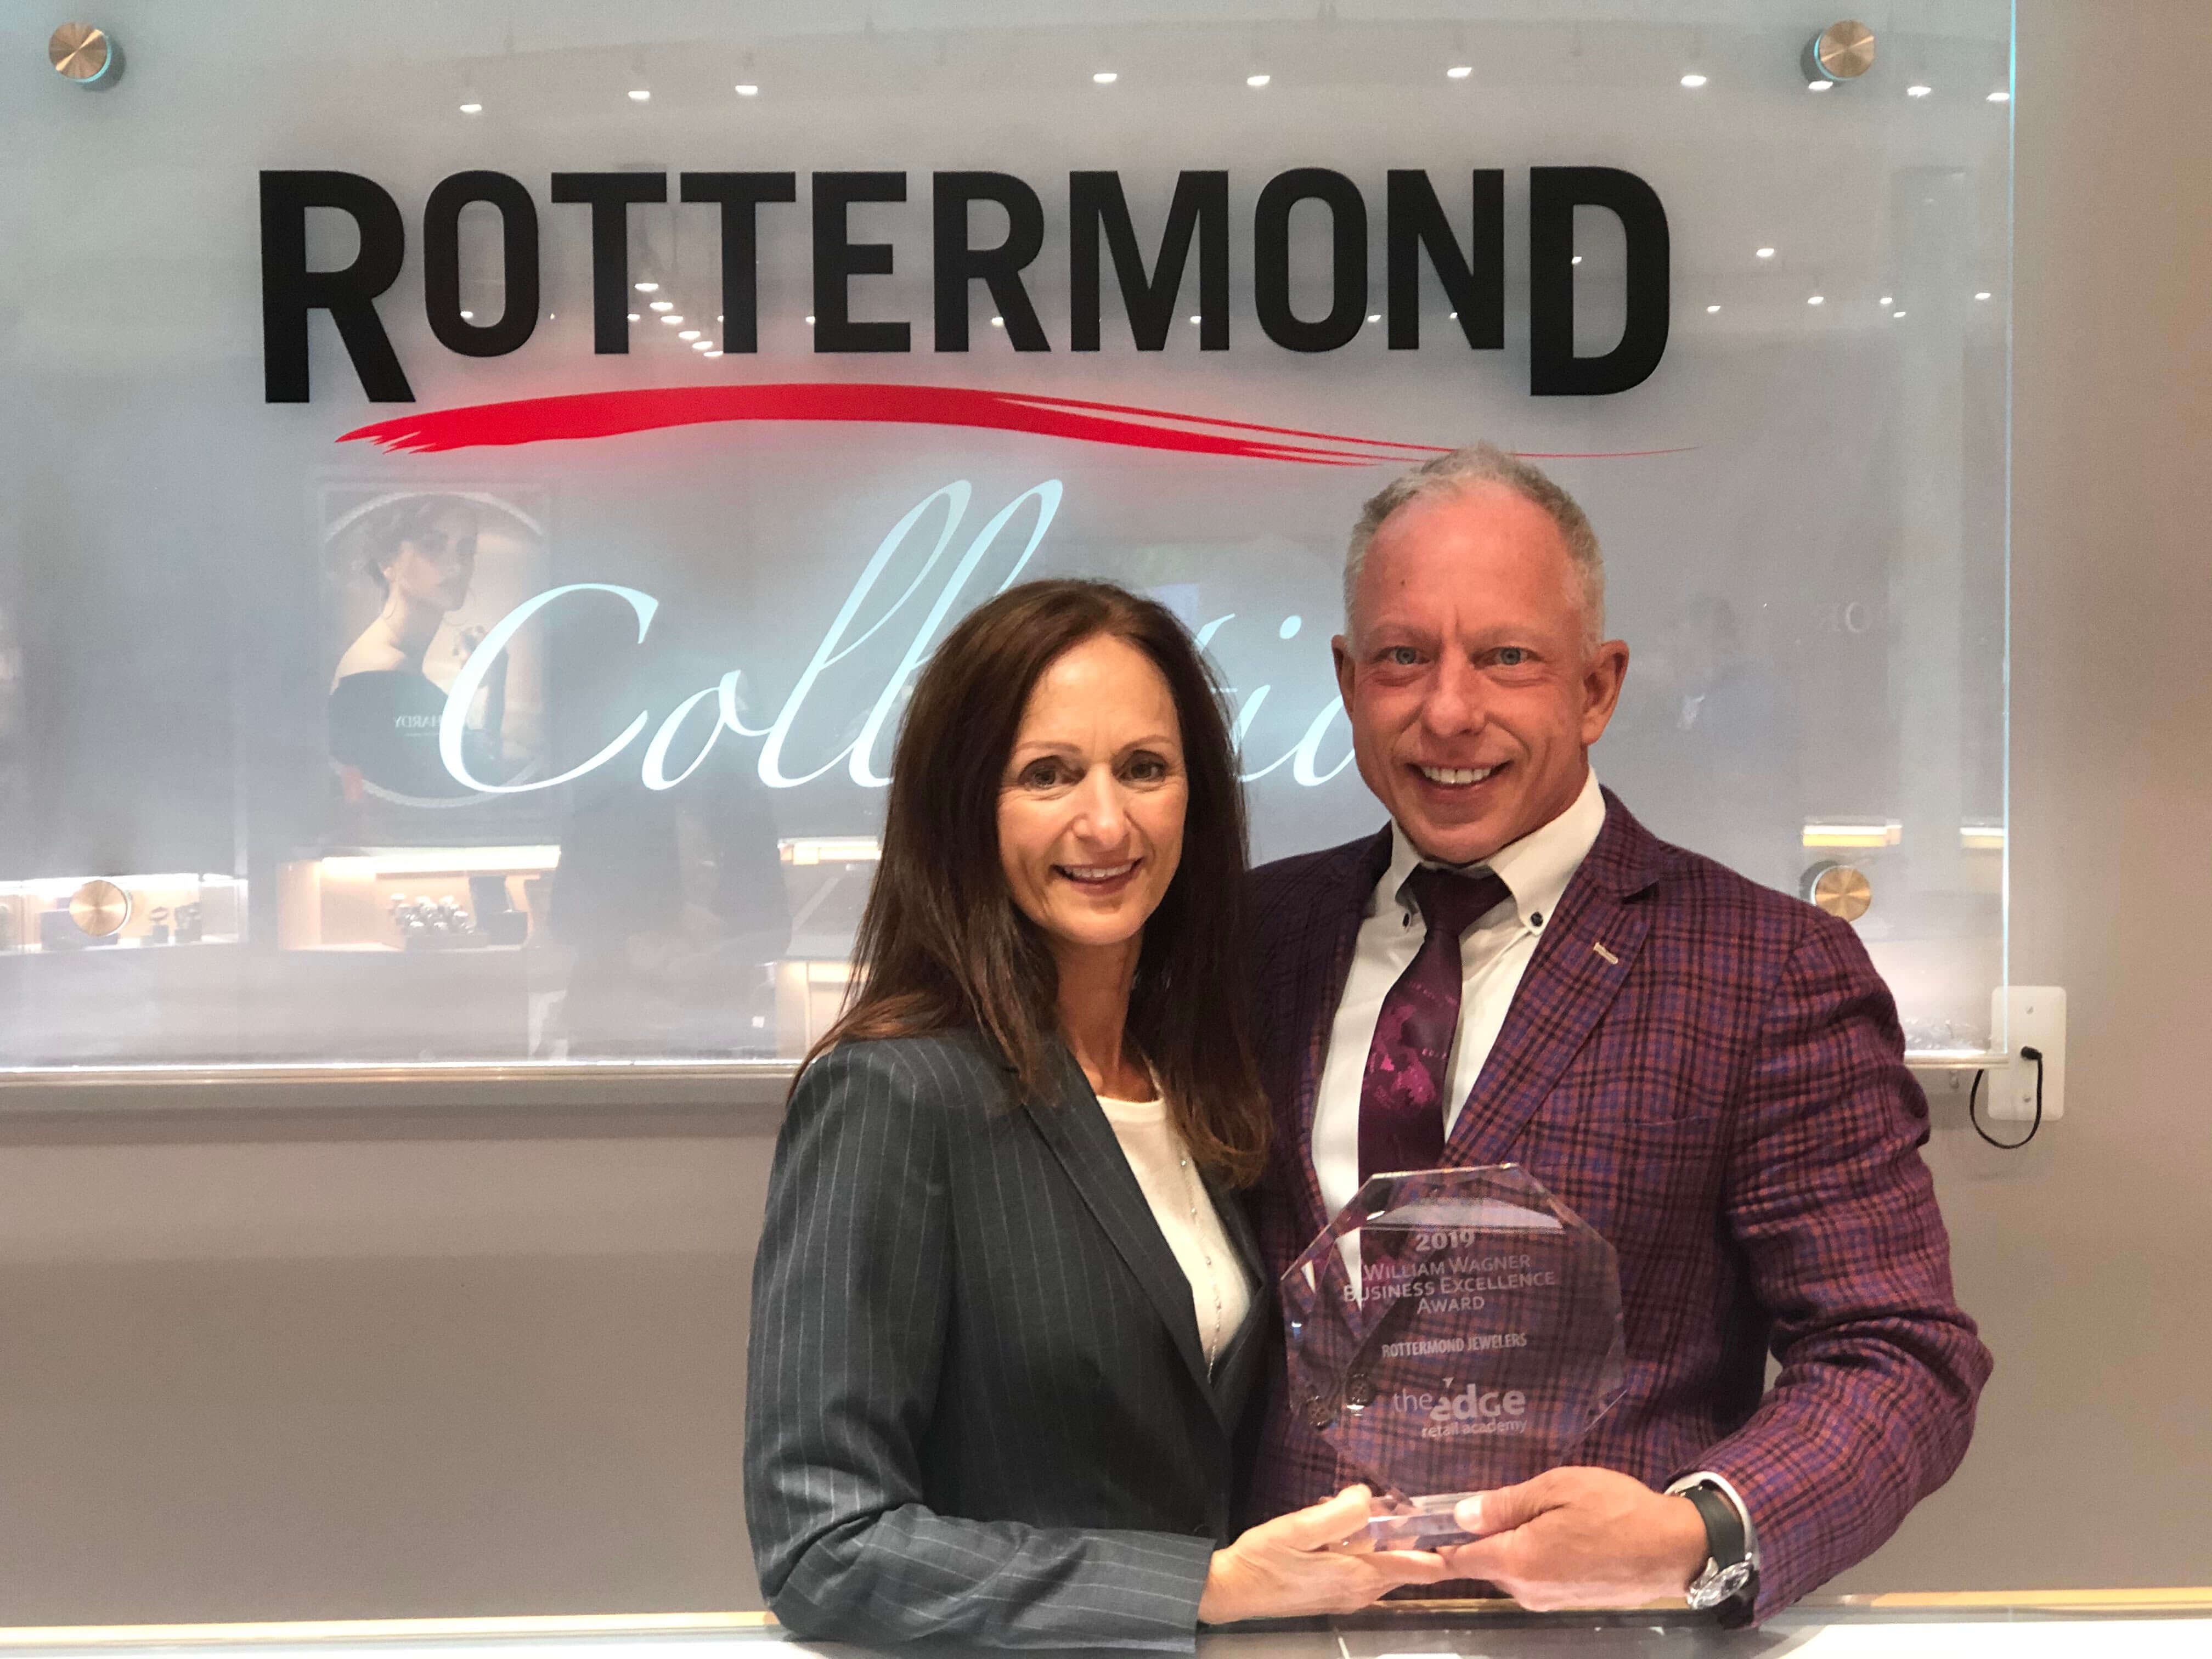 Rottermond Jewelers in Michigan Has Been Awarded the William